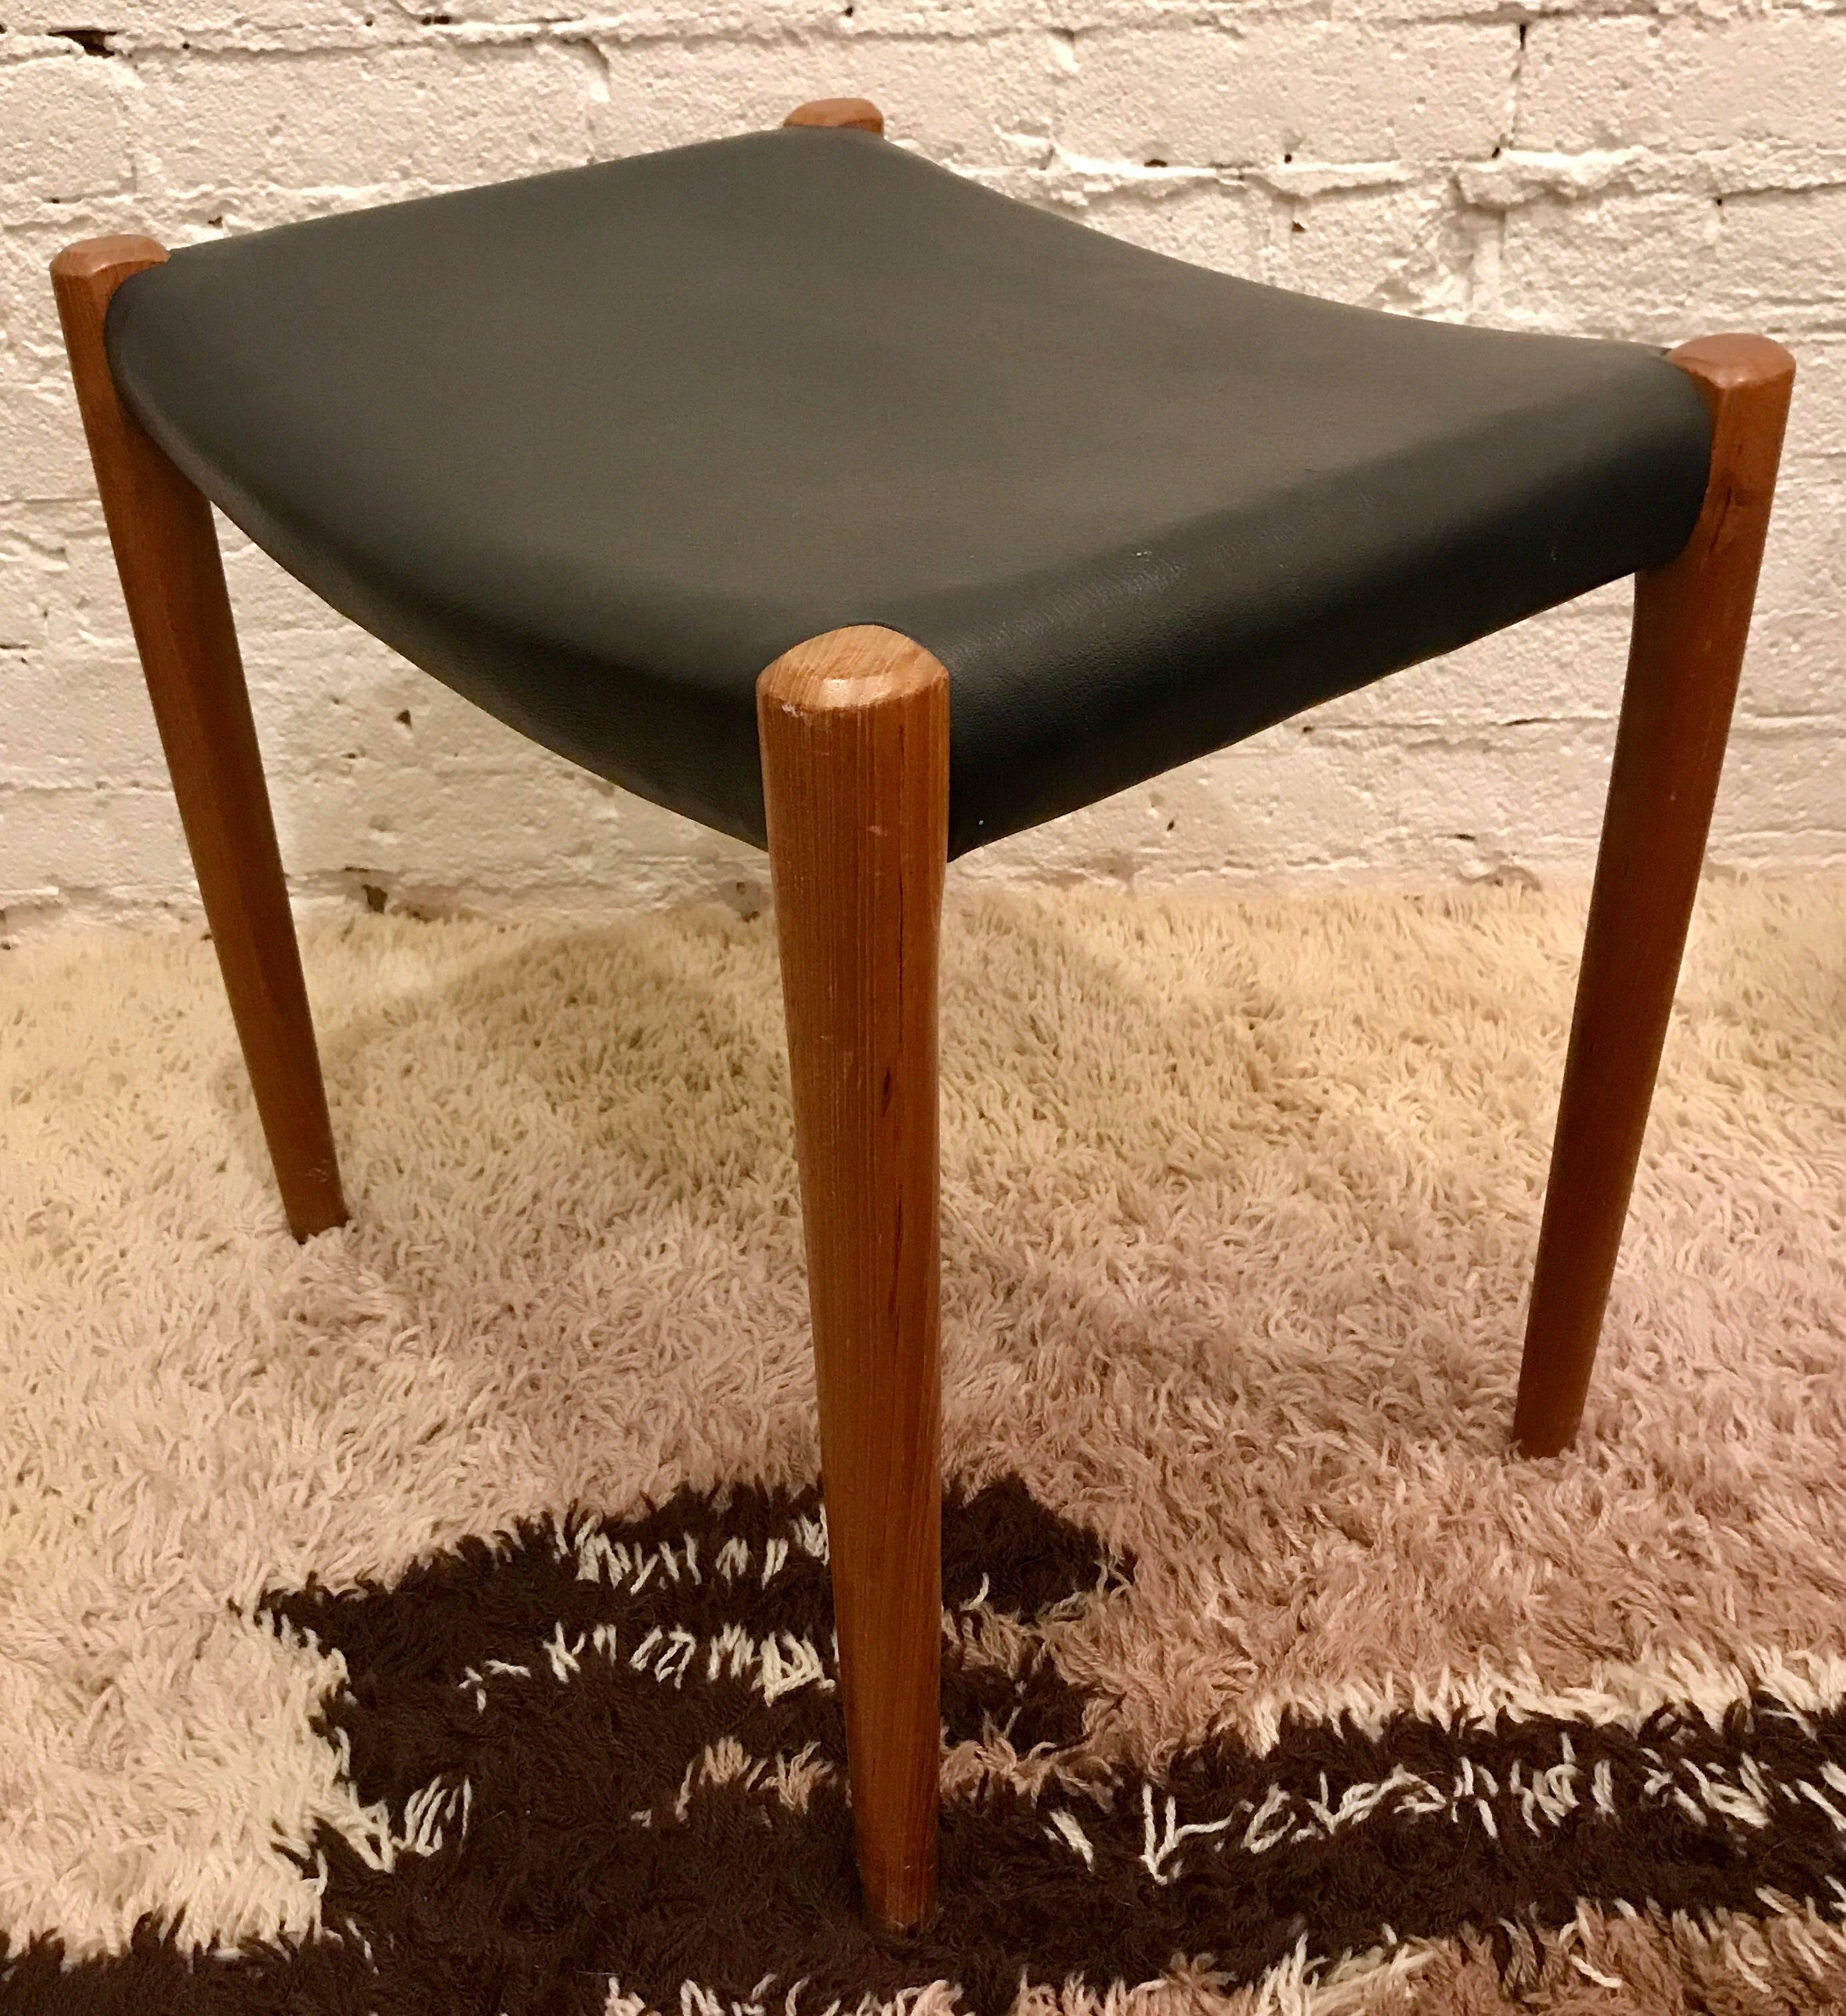 1960s Danish modern Model 80 teak footstool designed by Niels Moller for J.L. Moller. Footstool is upholstered in original black vinyl and marked with the Danish control stamp and the J.L. Moller logo.